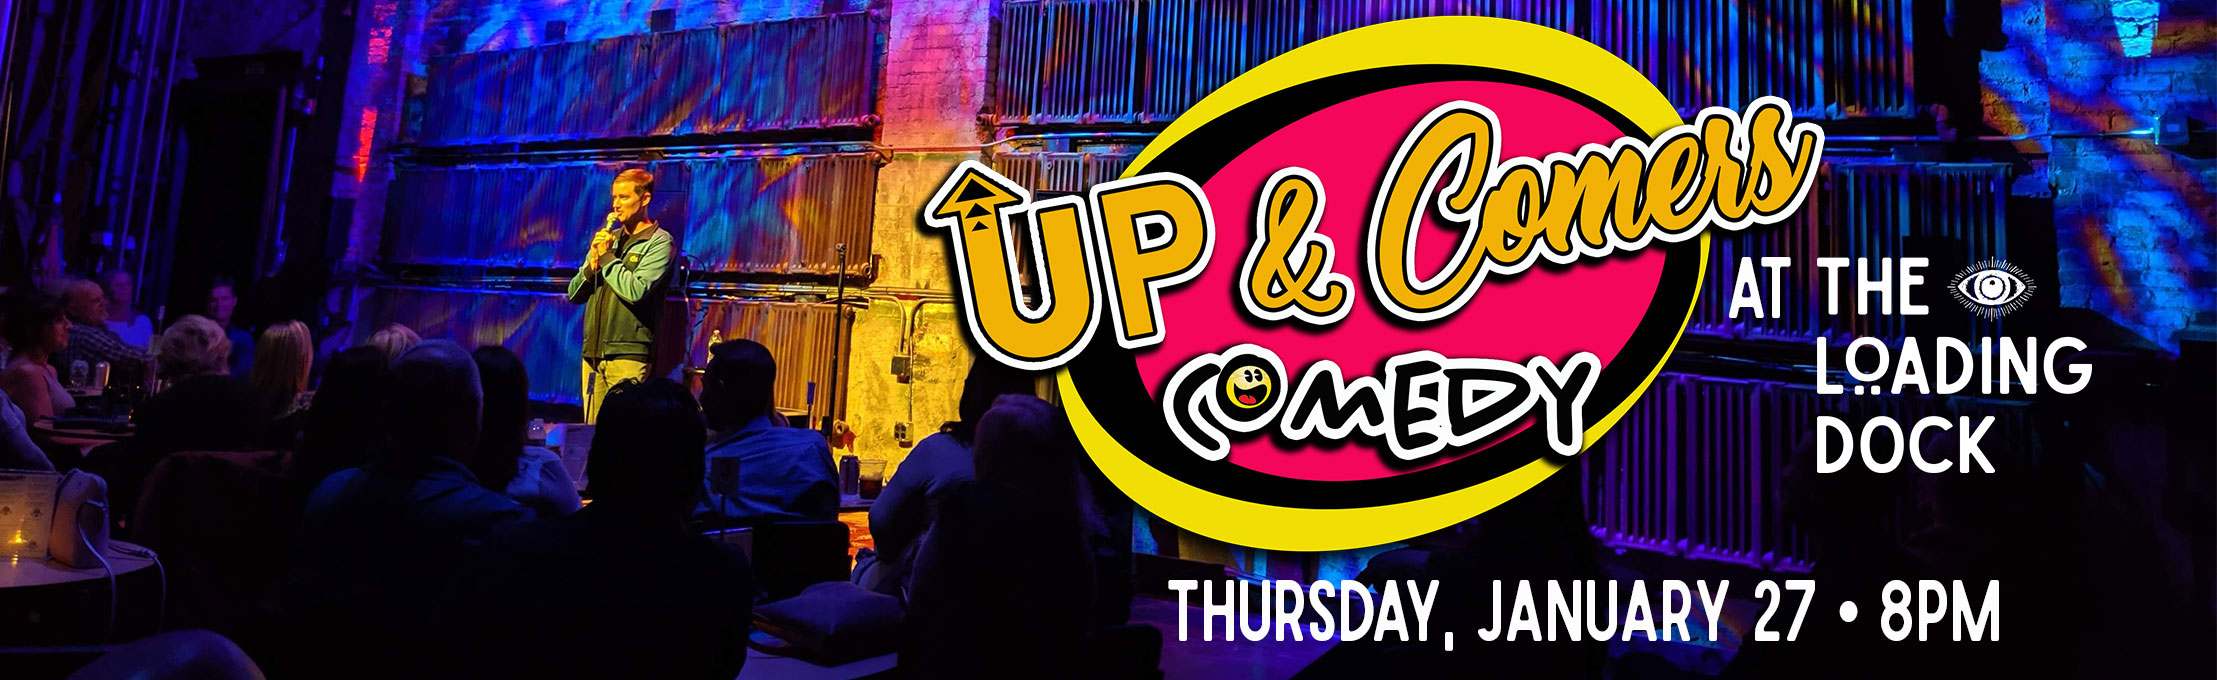 Up & Comers Comedy